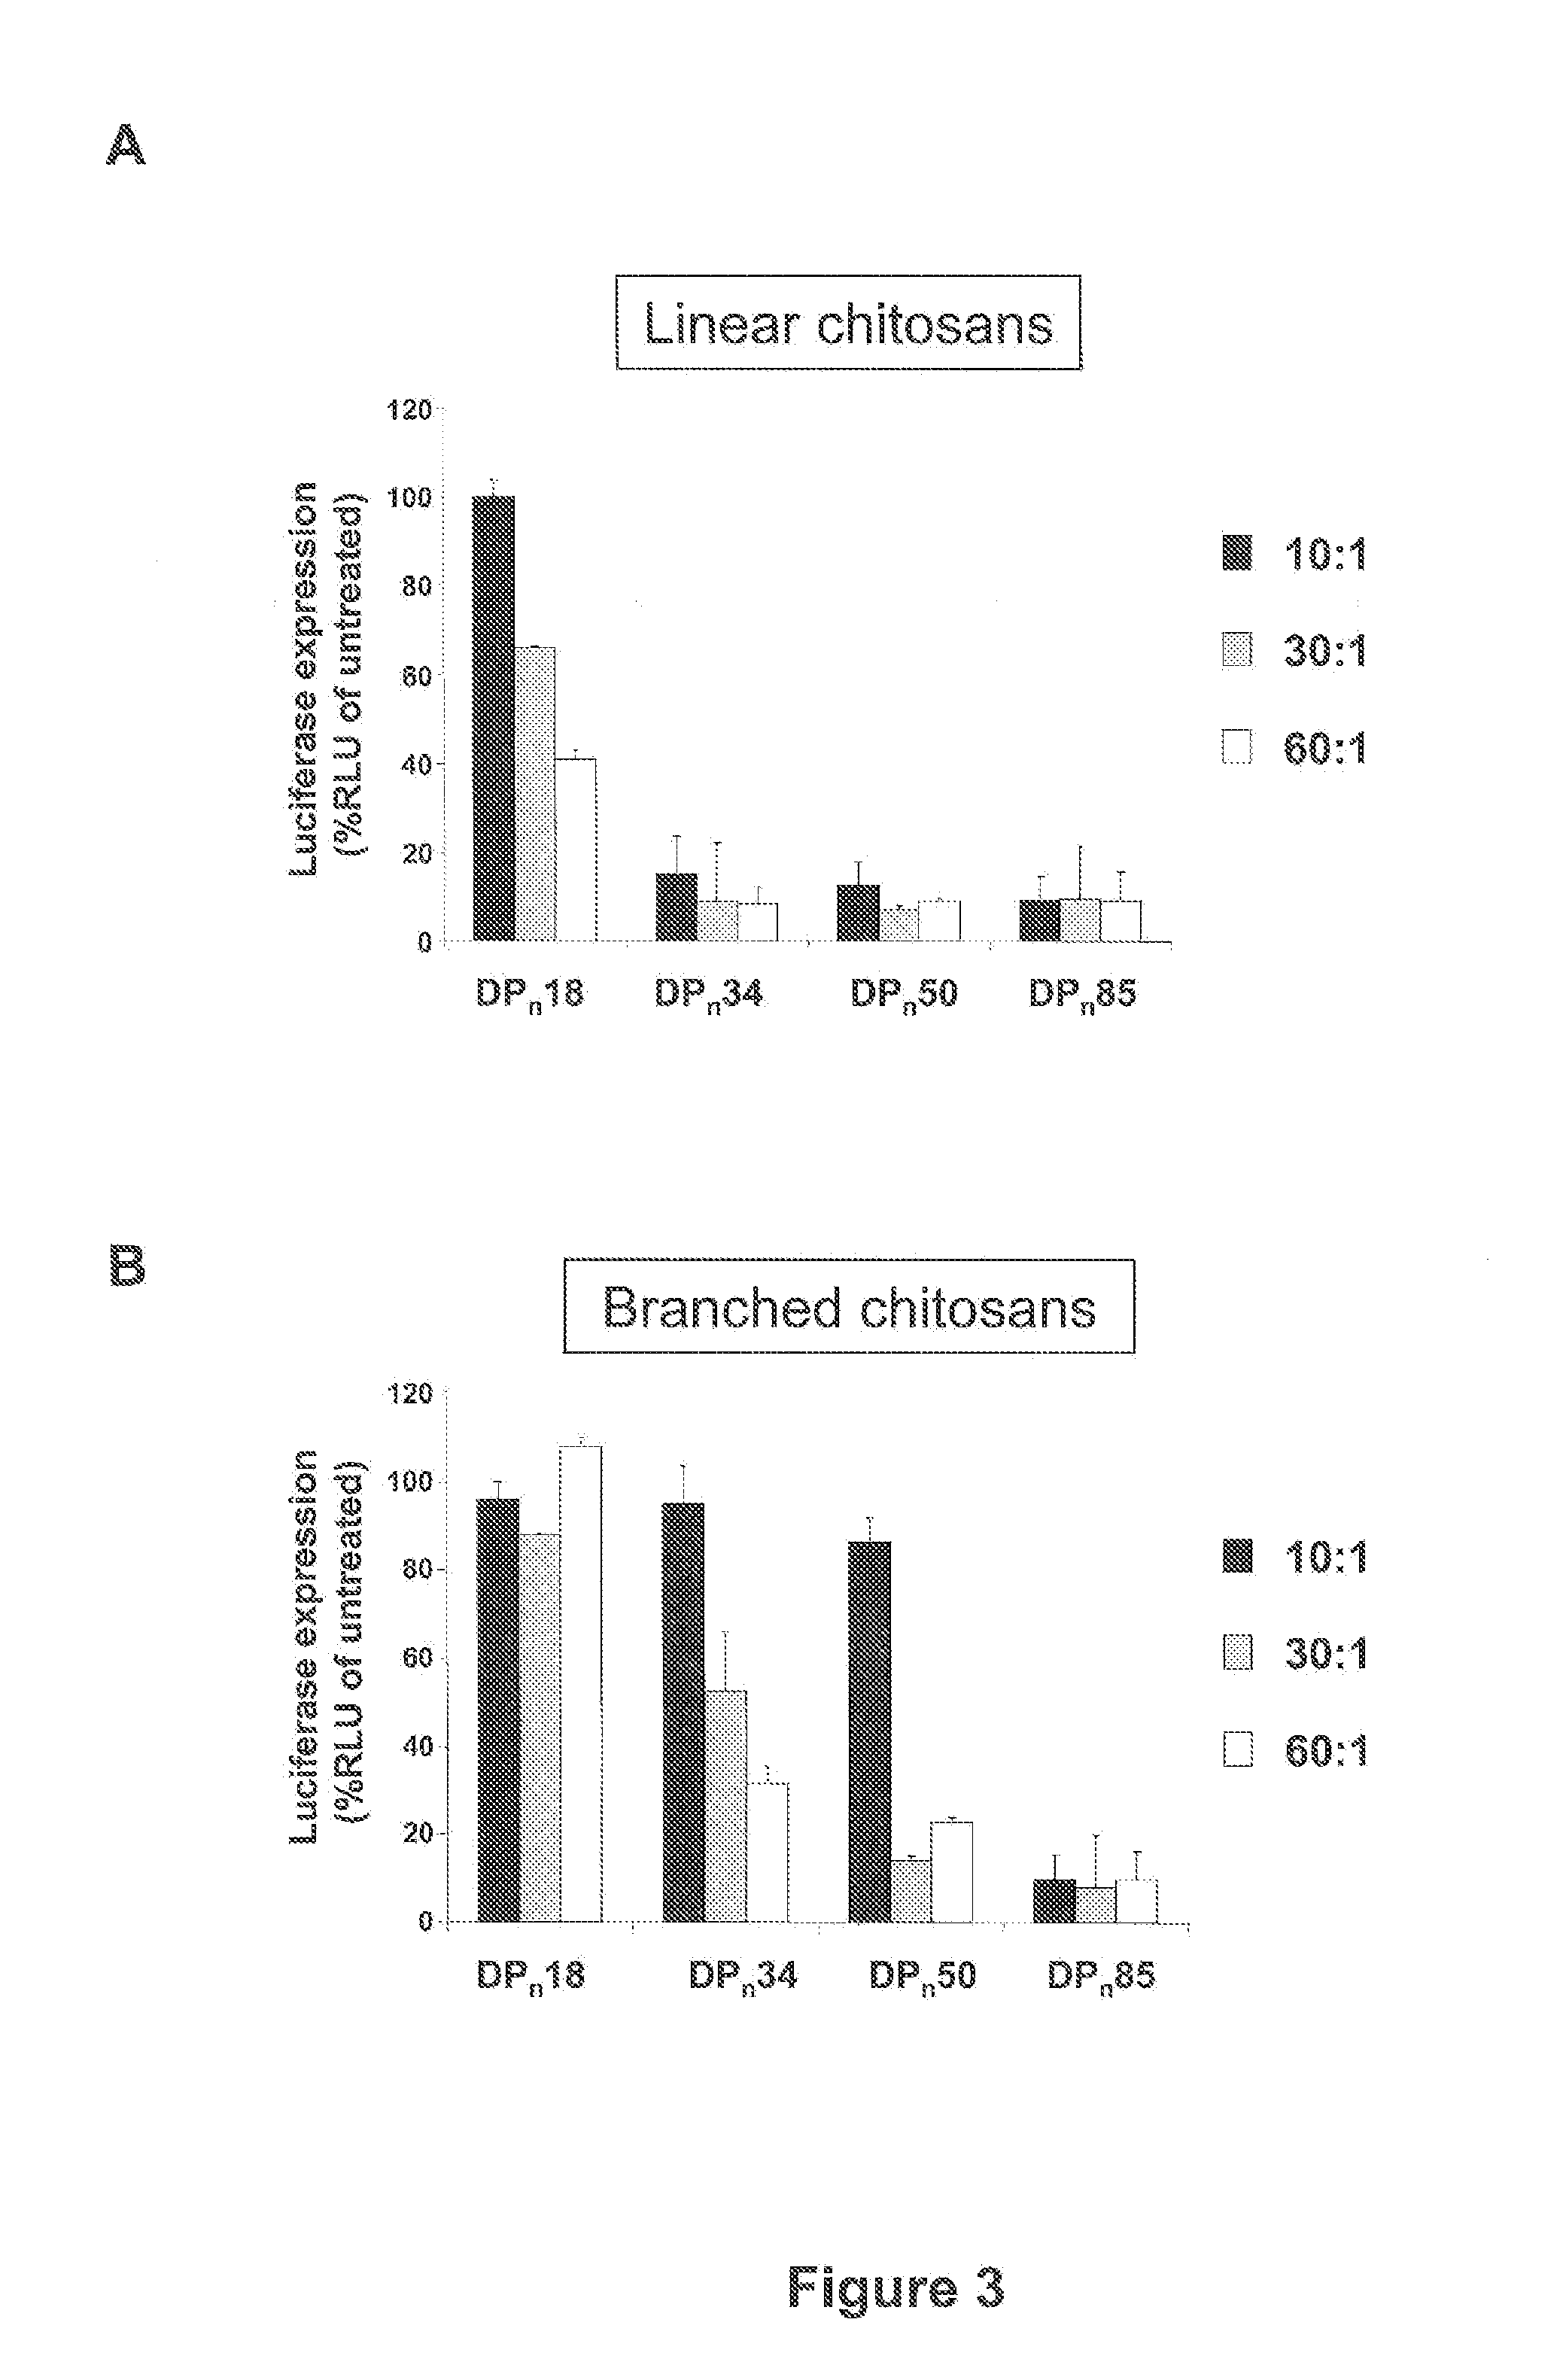 Oligonucleotide Non-Viral Delivery Systems